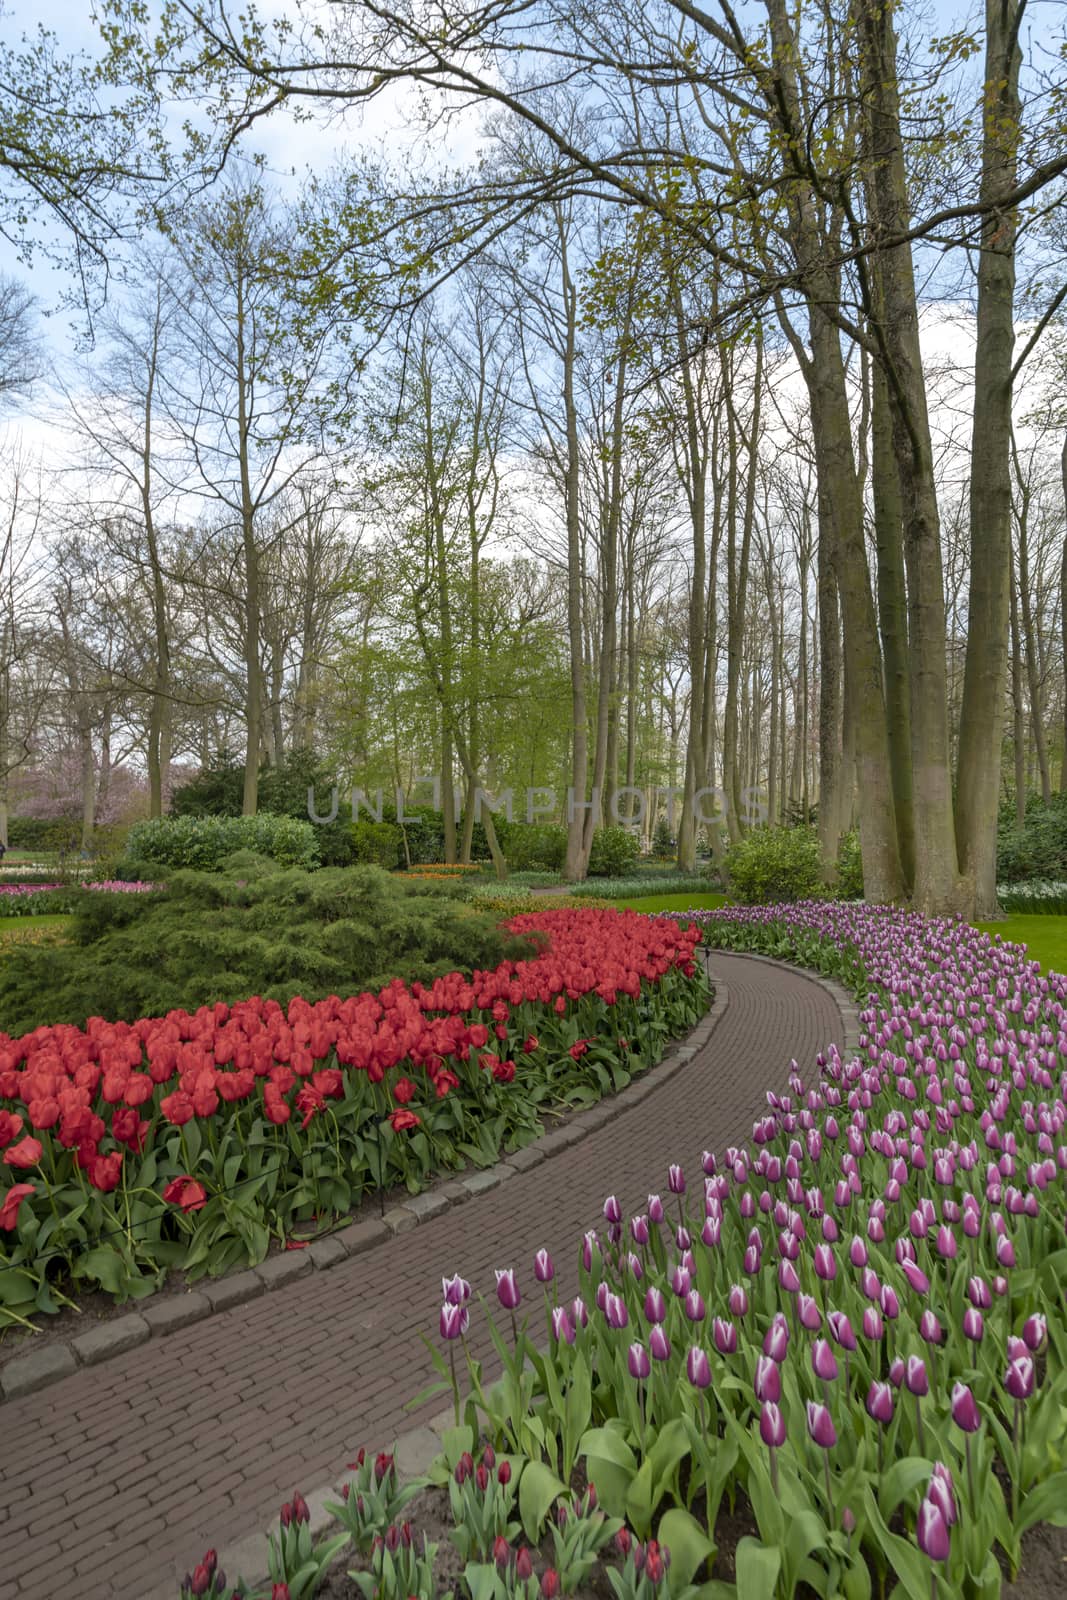 Pure red and pink white color tulips blossom blooming under a very well maintained garden in spring time by ankorlight